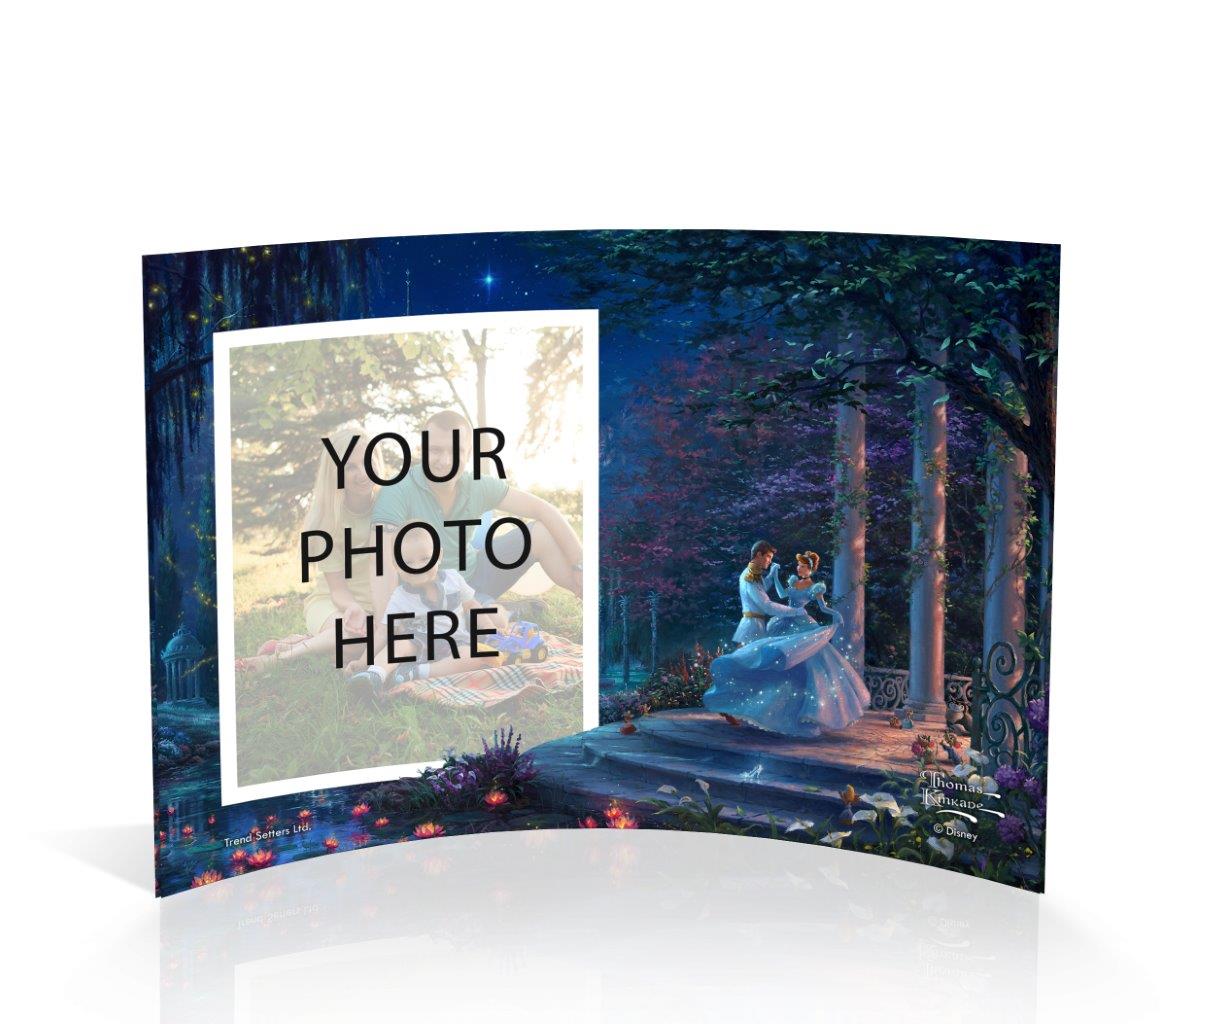 Disney (Cinderella Dancing in the Starlight - Personalized) 7" x 5" Curved Acrylic Print